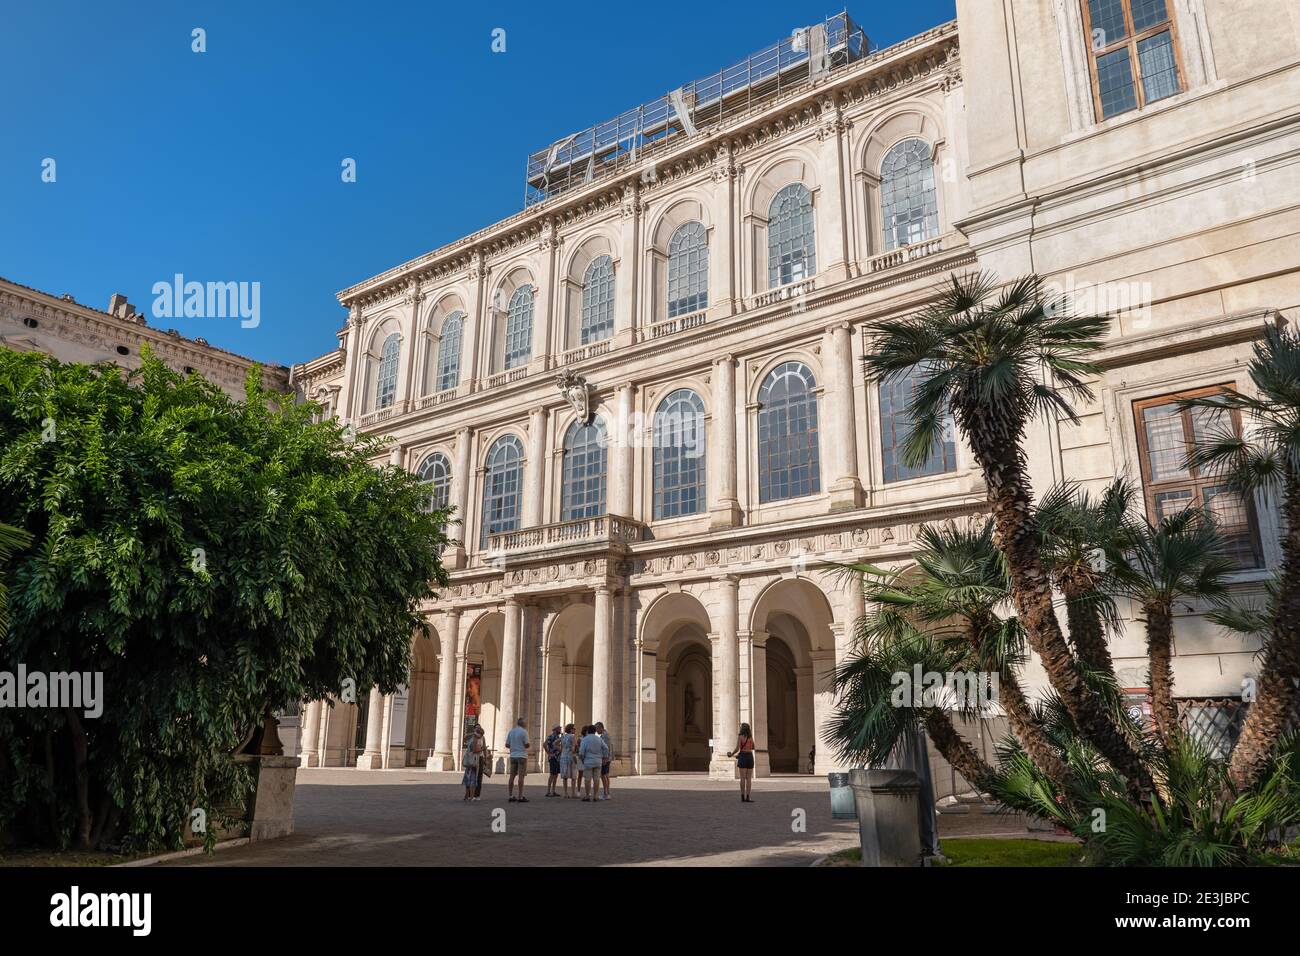 Barberini Palace (Palazzo Barberini) in Rome, Italy, housing National Gallery of Ancient Art (Galleria Nazionale d'Arte Antica) Stock Photo